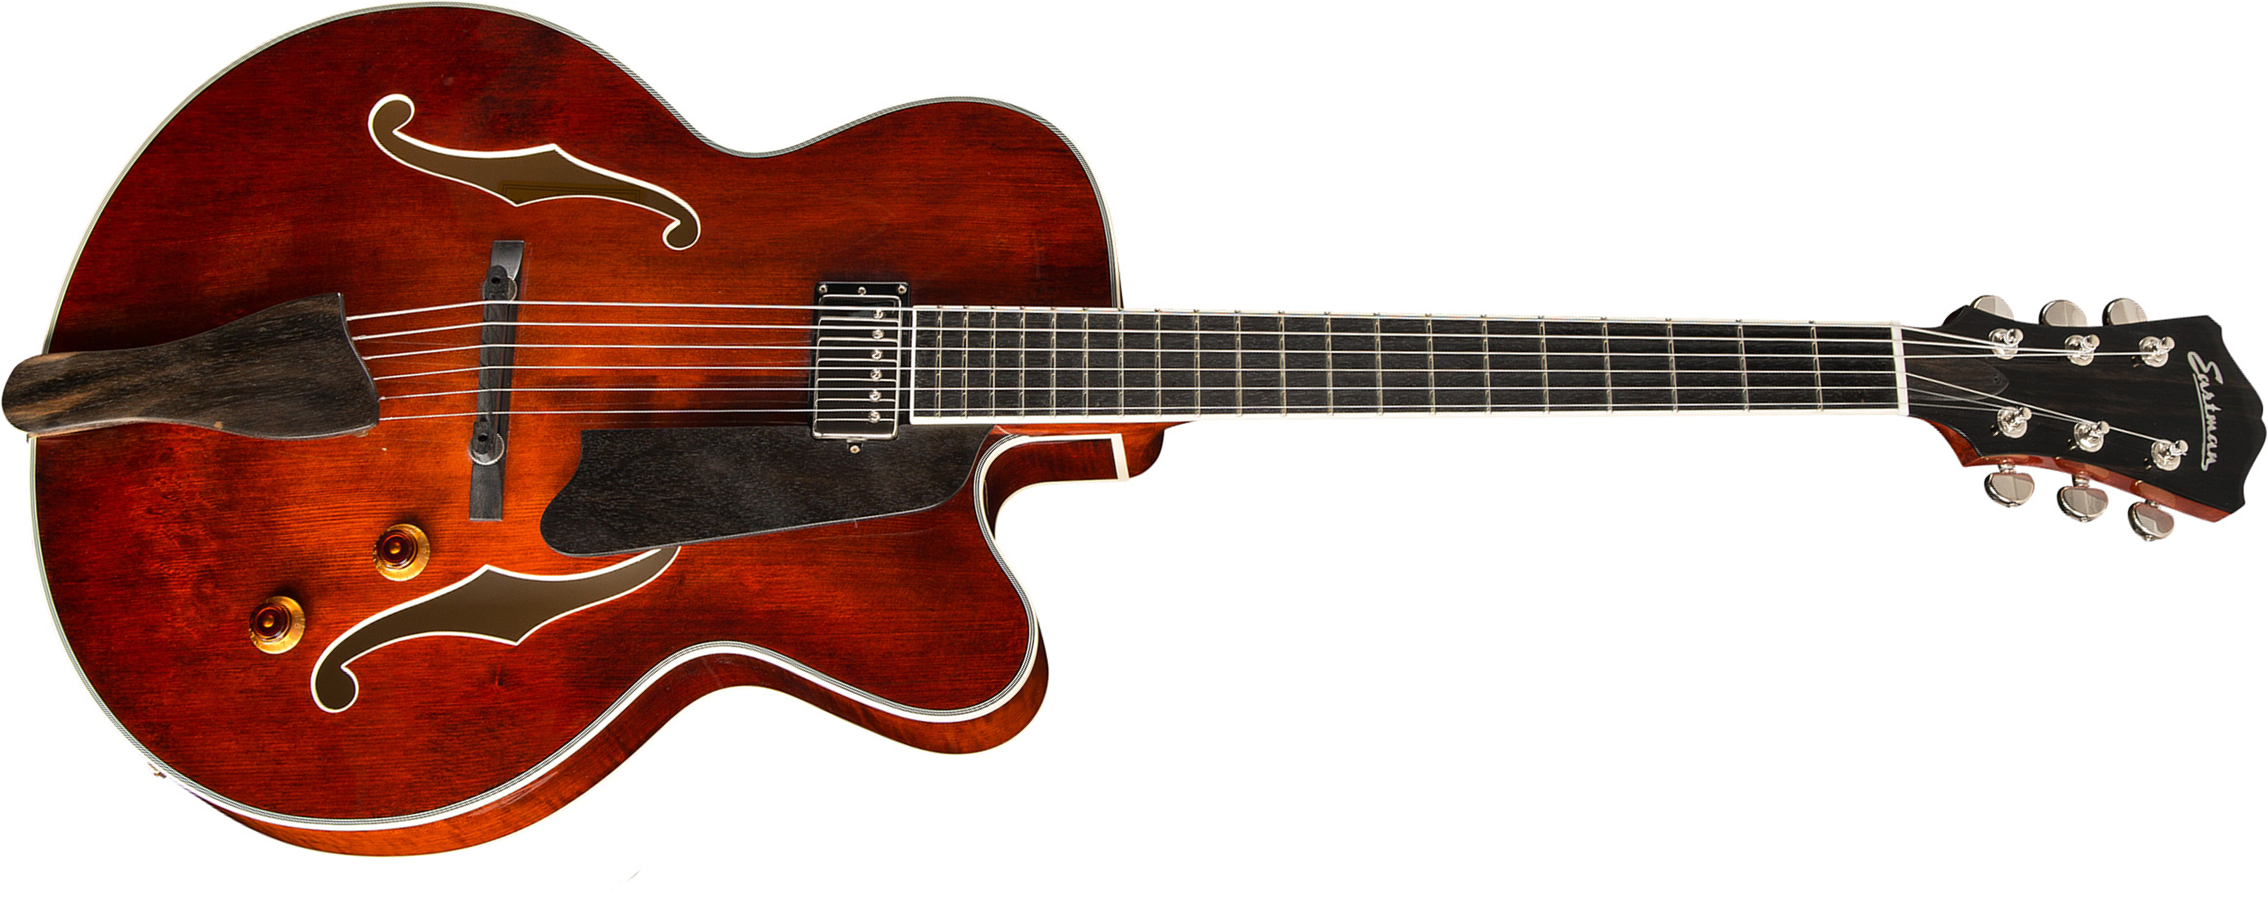 Eastman Ar503ce Archtop Solid Top H Ht Eb - Classic - Semi hollow elektriche gitaar - Main picture